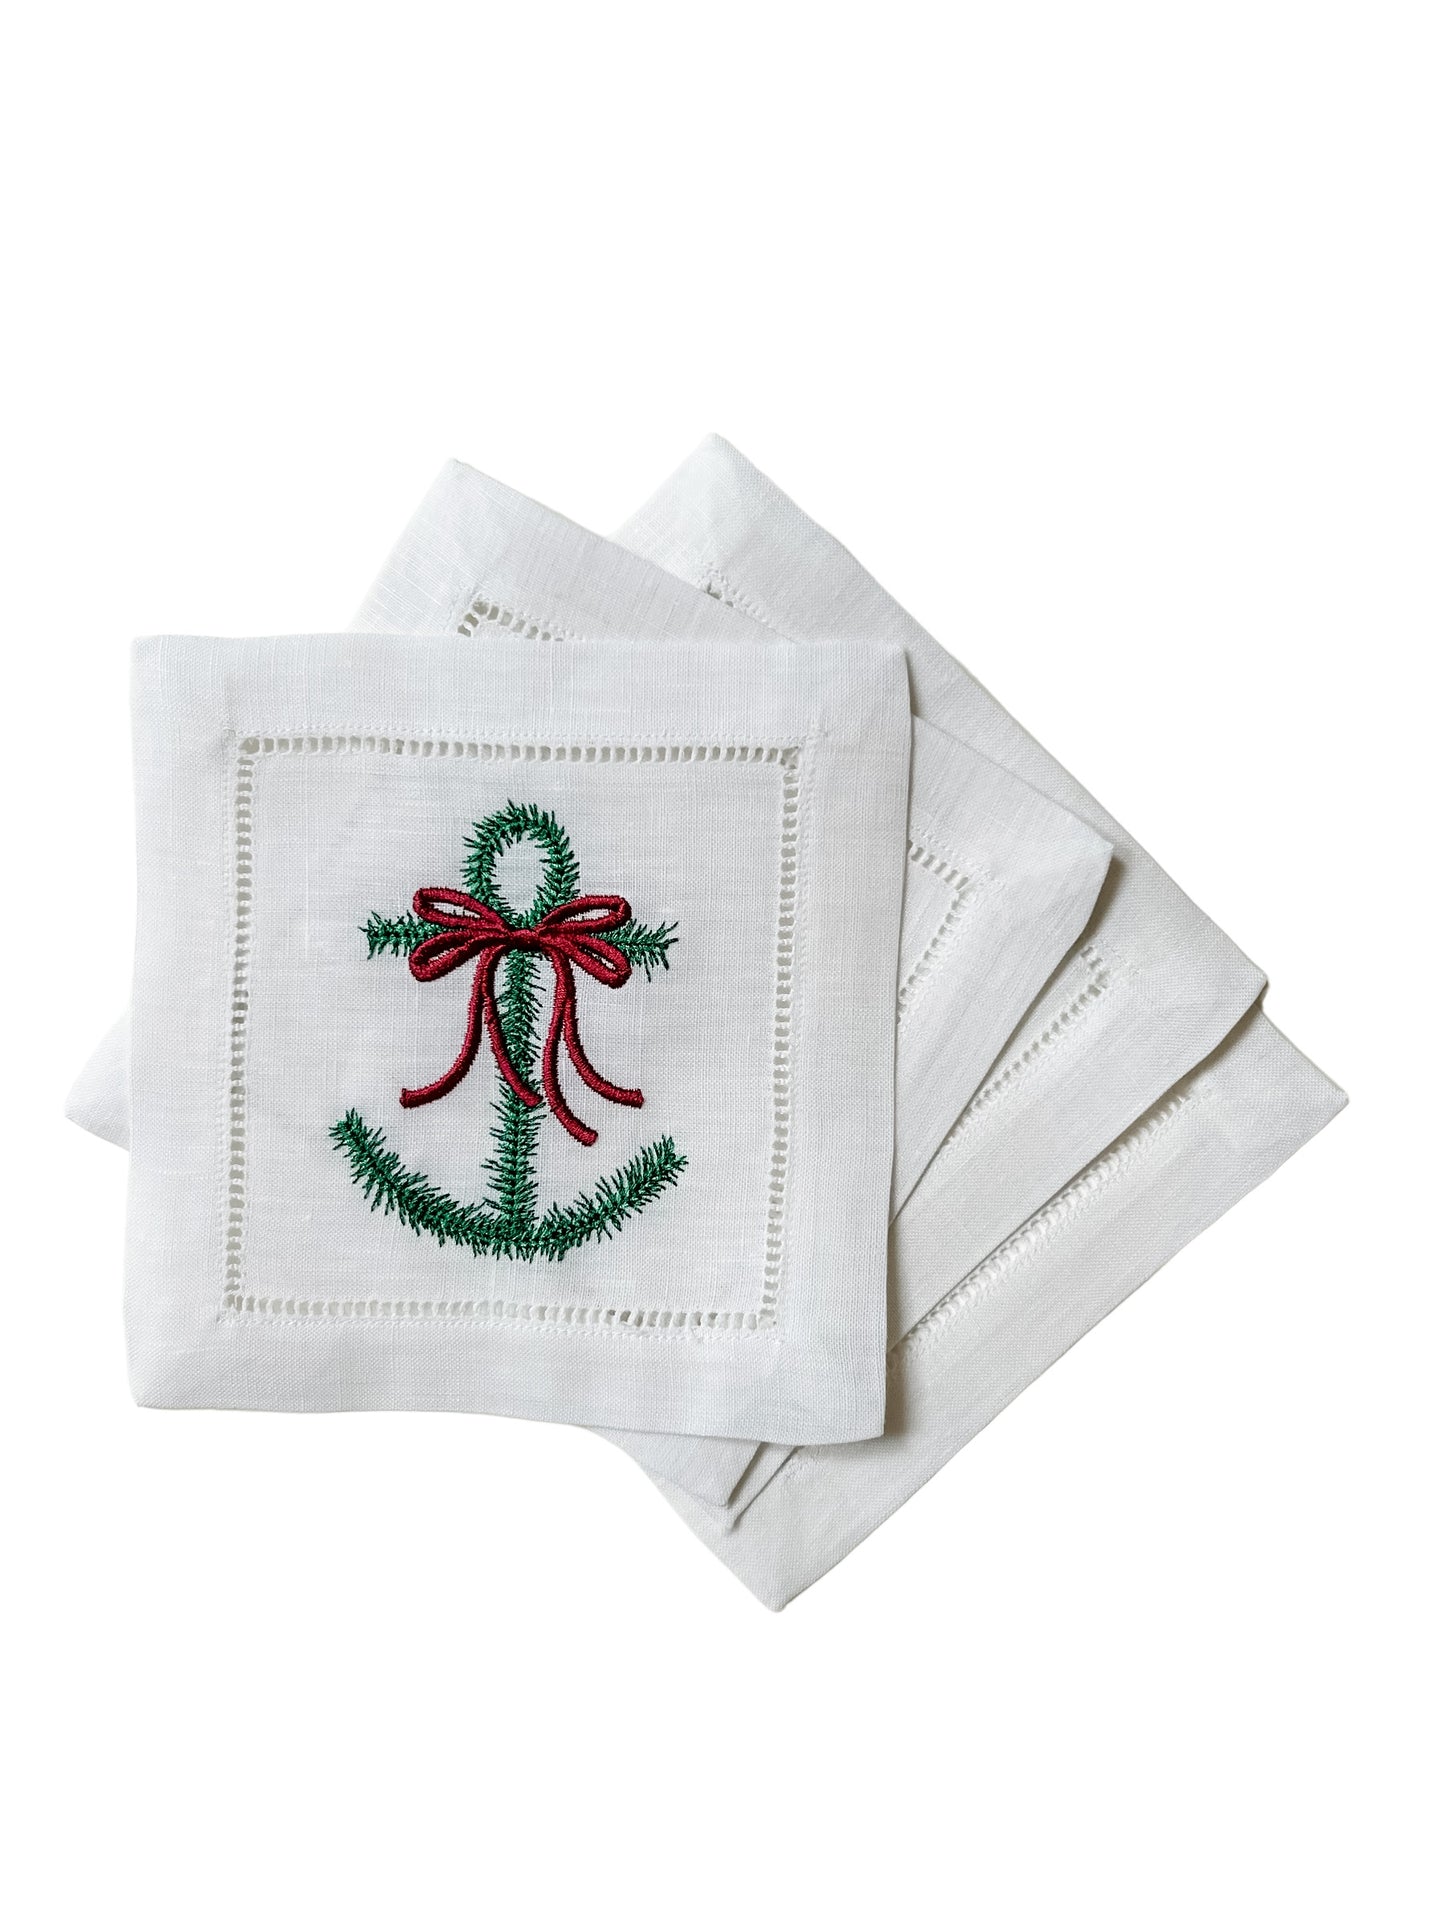 Anchor of Greens Cocktail Napkins